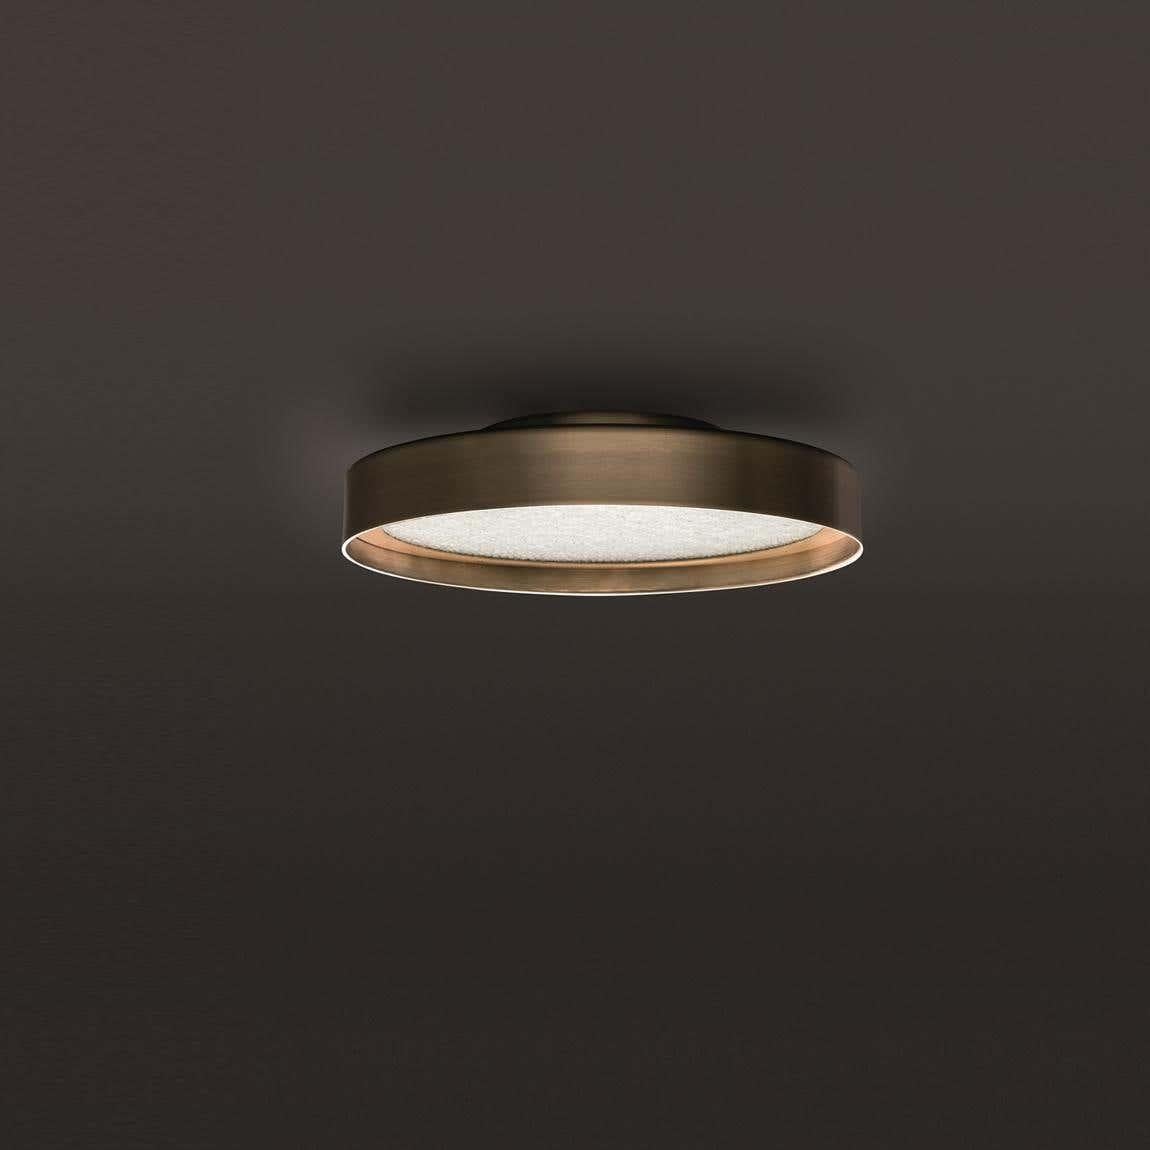 Italian Christophe Pillet Ceiling and Wall Lamp 'Berlin' Small by Oluce For Sale